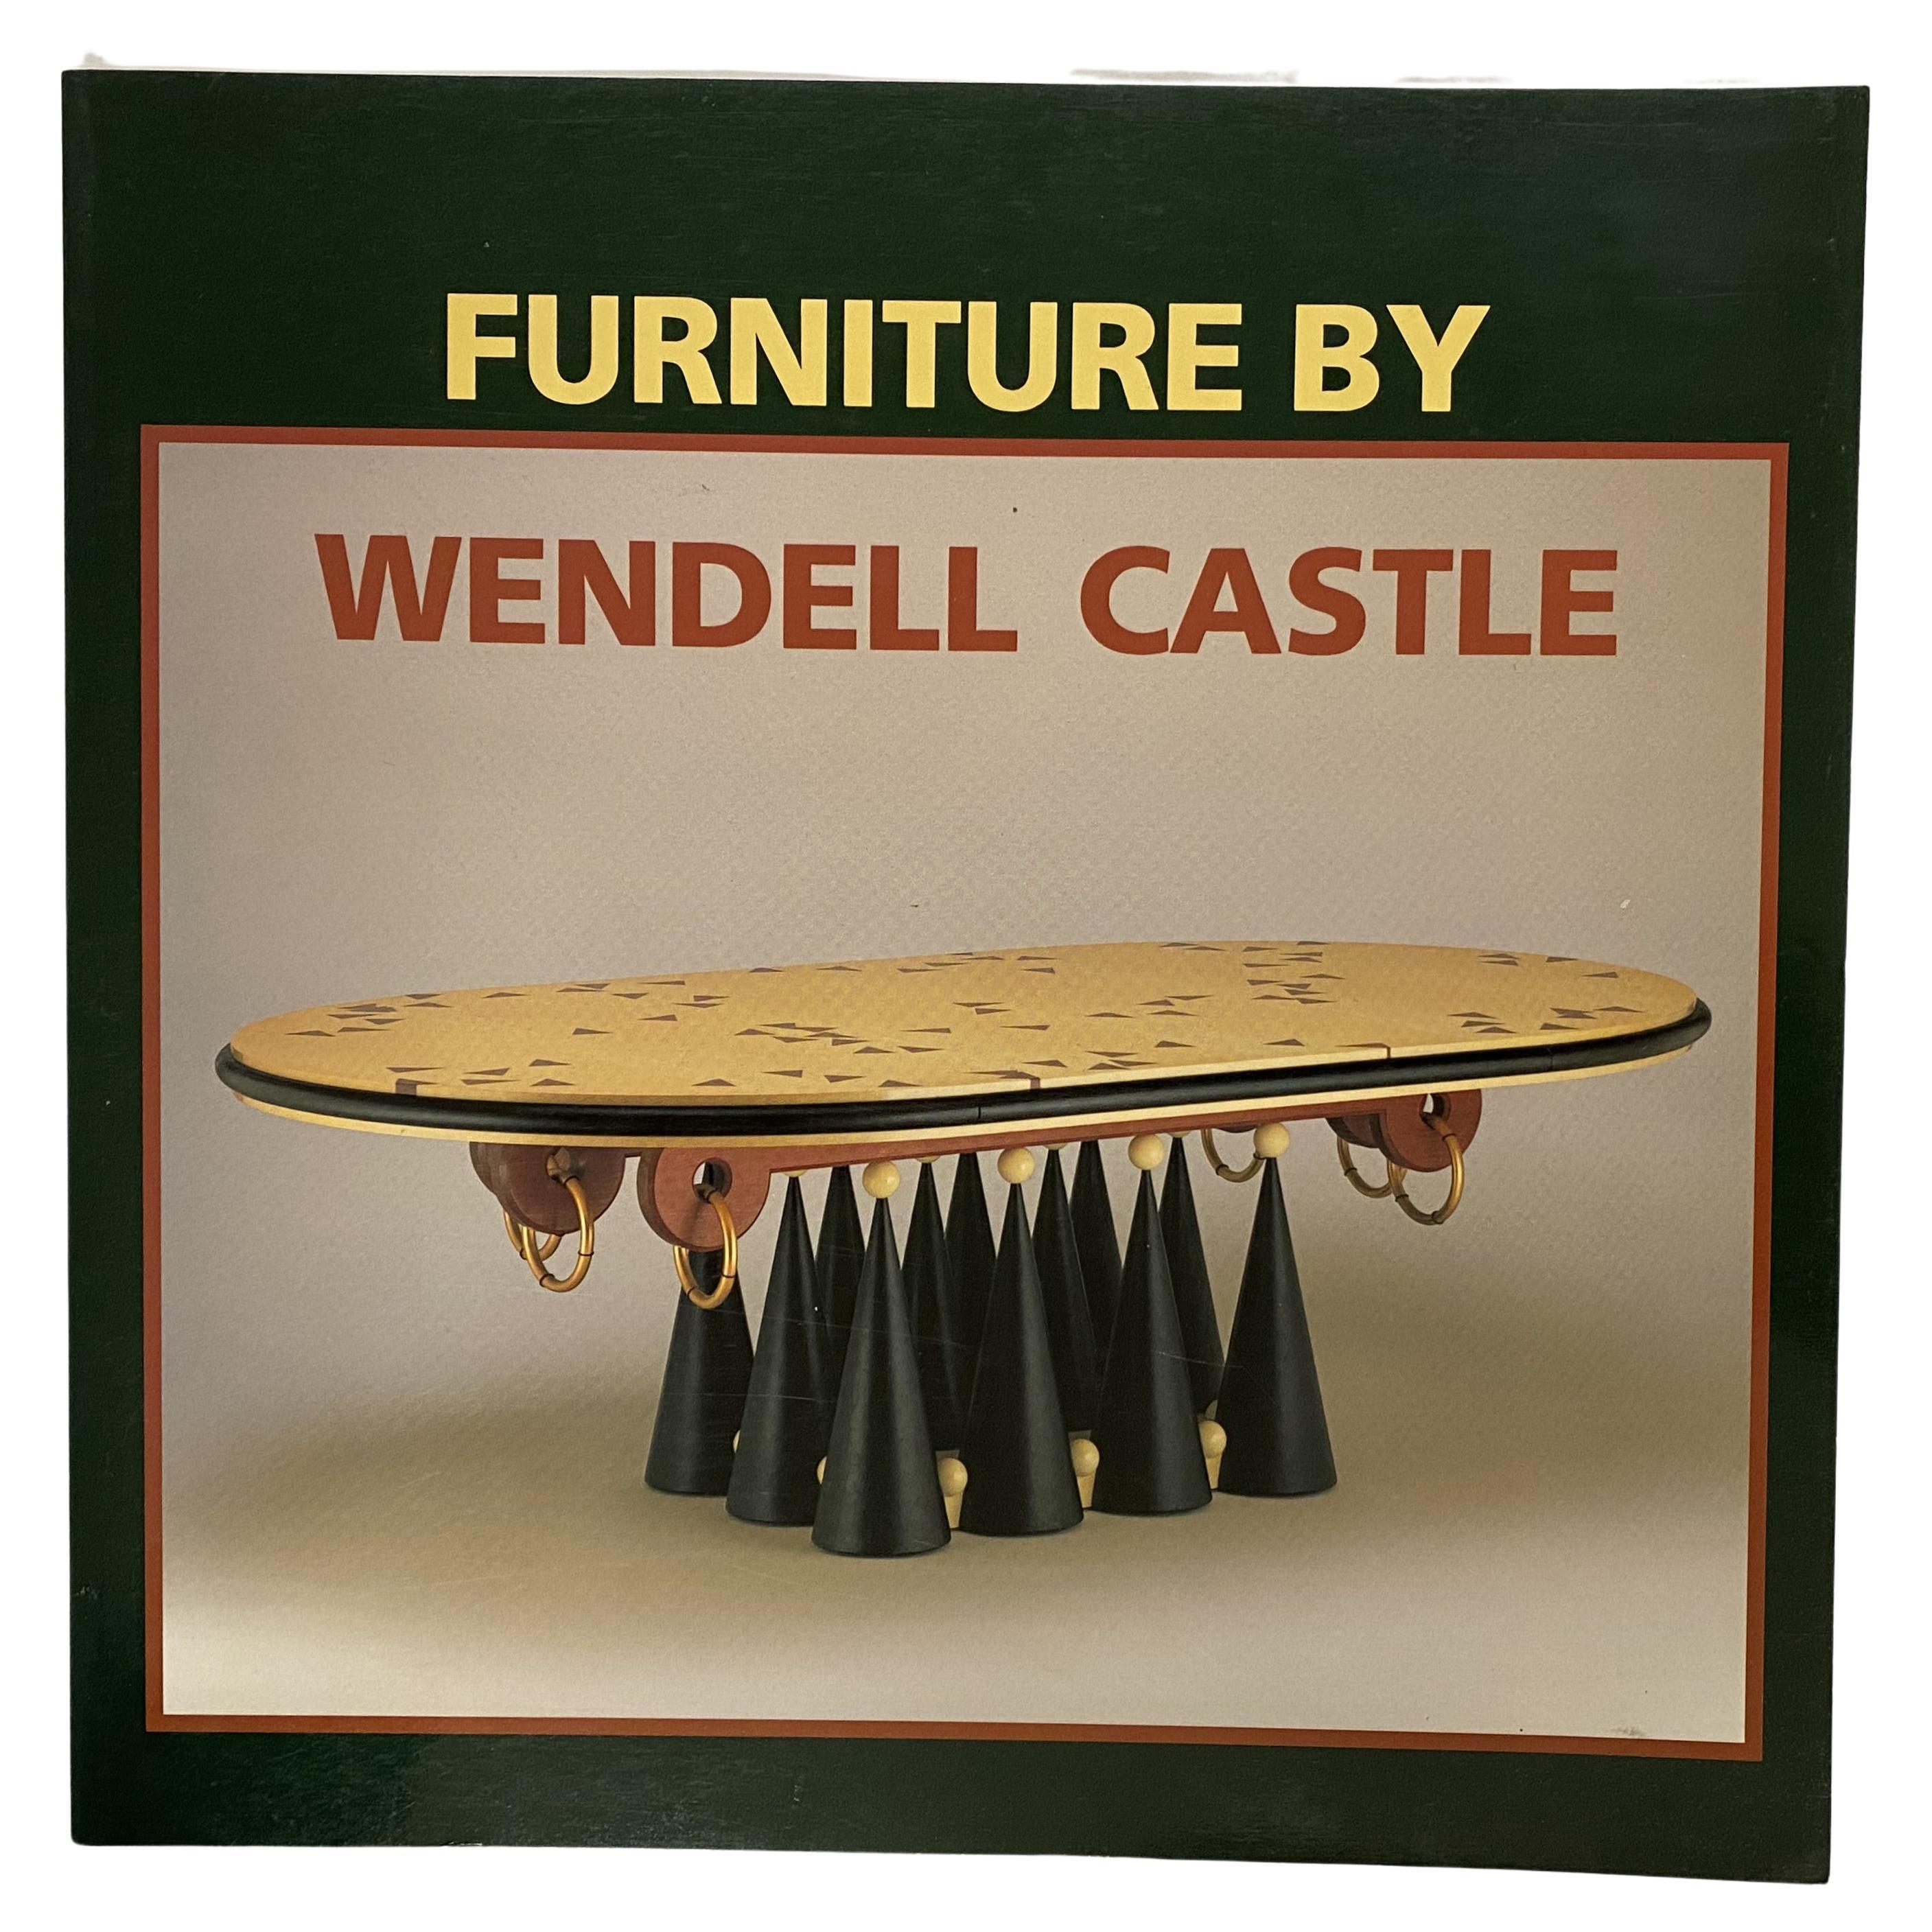 Furniture by Wedell Castle by Davira S. Taragin (Book) For Sale